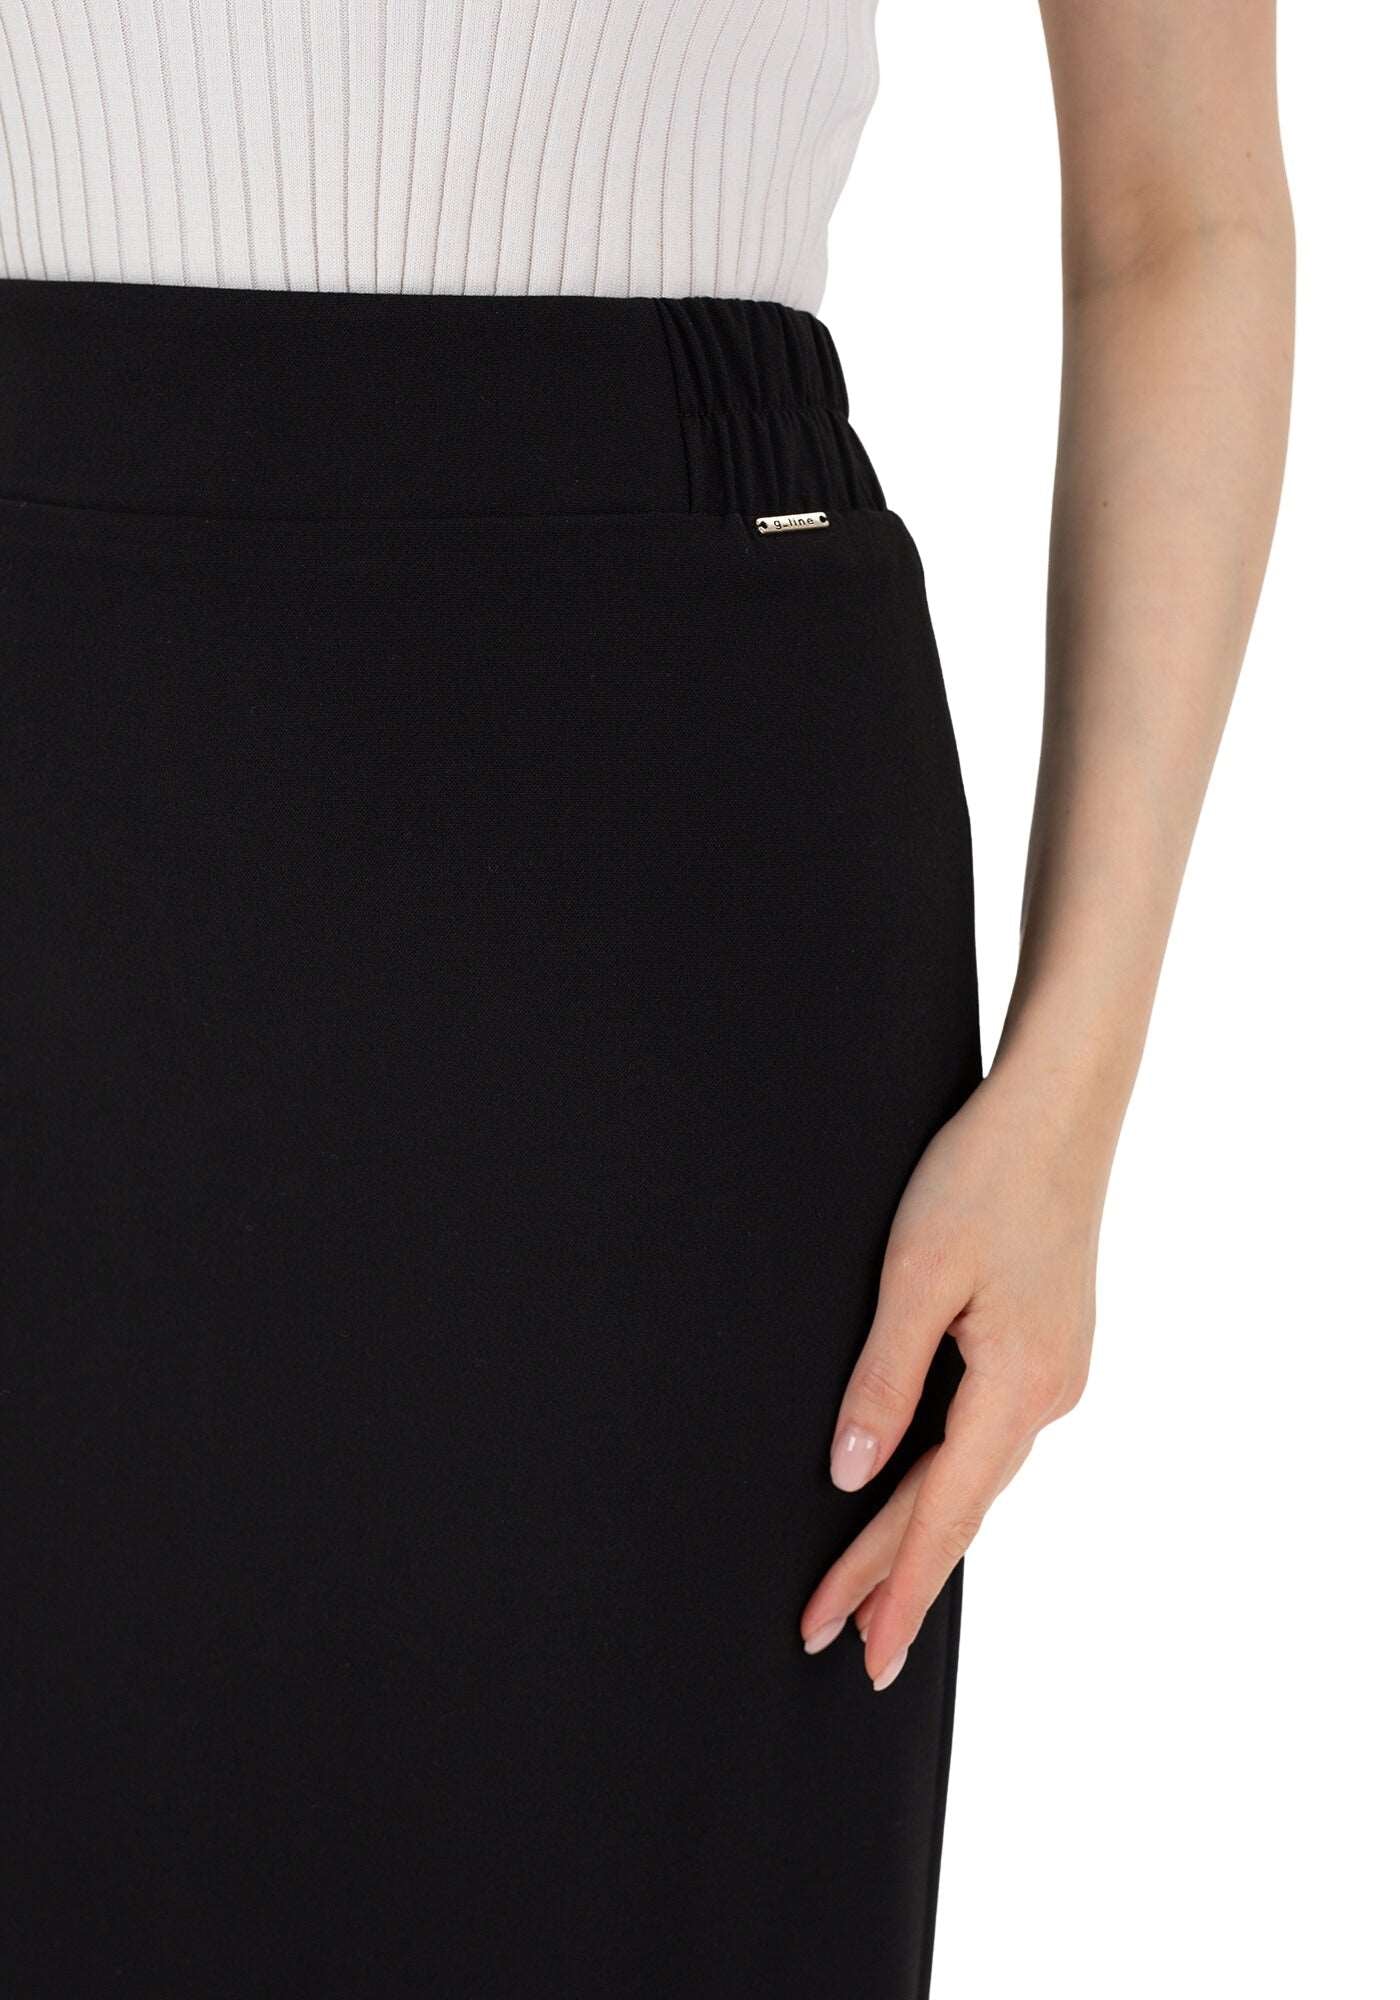 Black Midi Pencil Skirt with Elastic Waist and Closed Back Vent G-Line